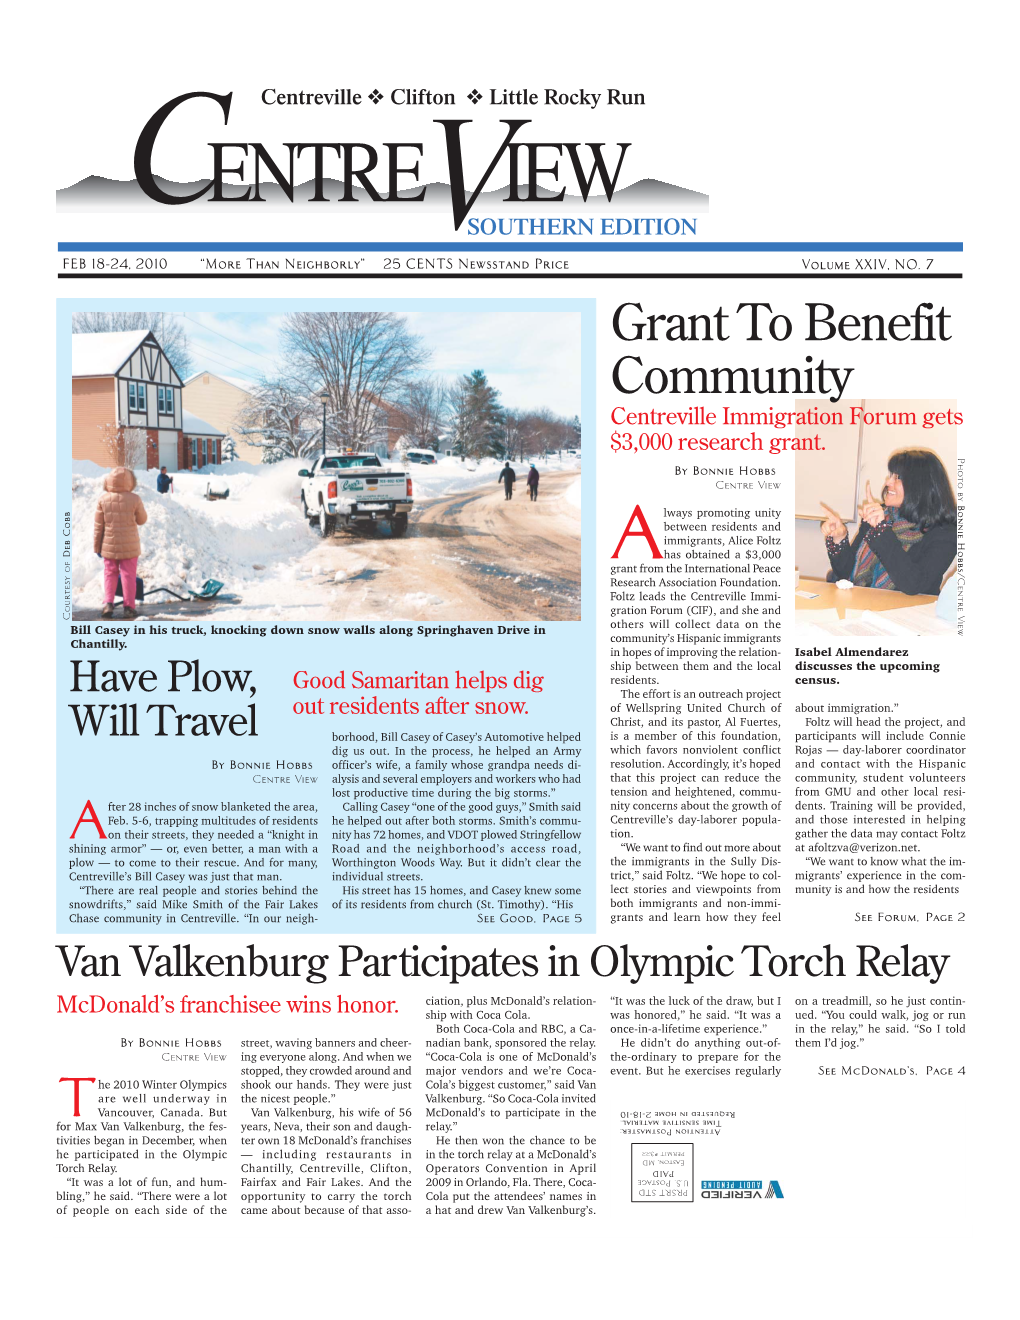 Grant to Benefit Community Centreville Immigration Forum Gets $3,000 Research Grant